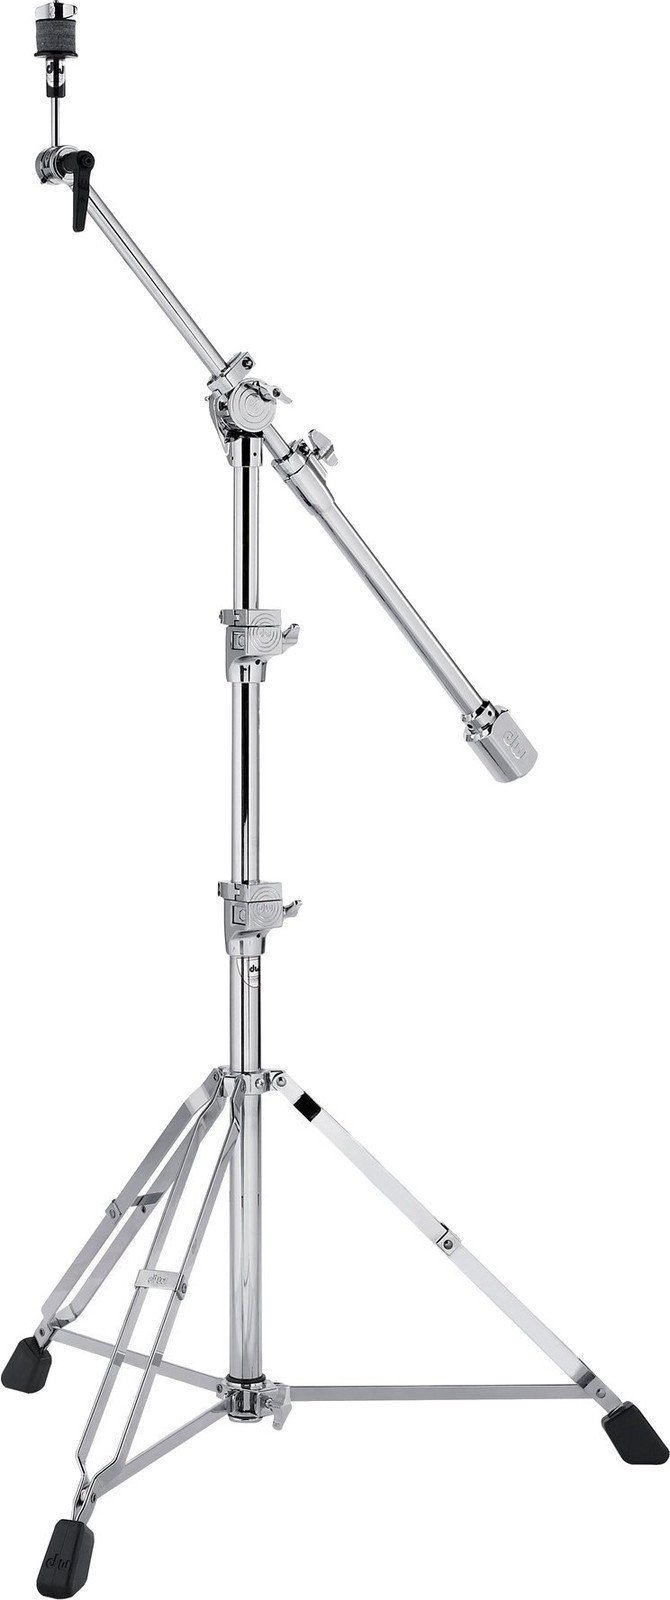 Cymbal Boom Stand DW 8700 Cymbal Boom Stand